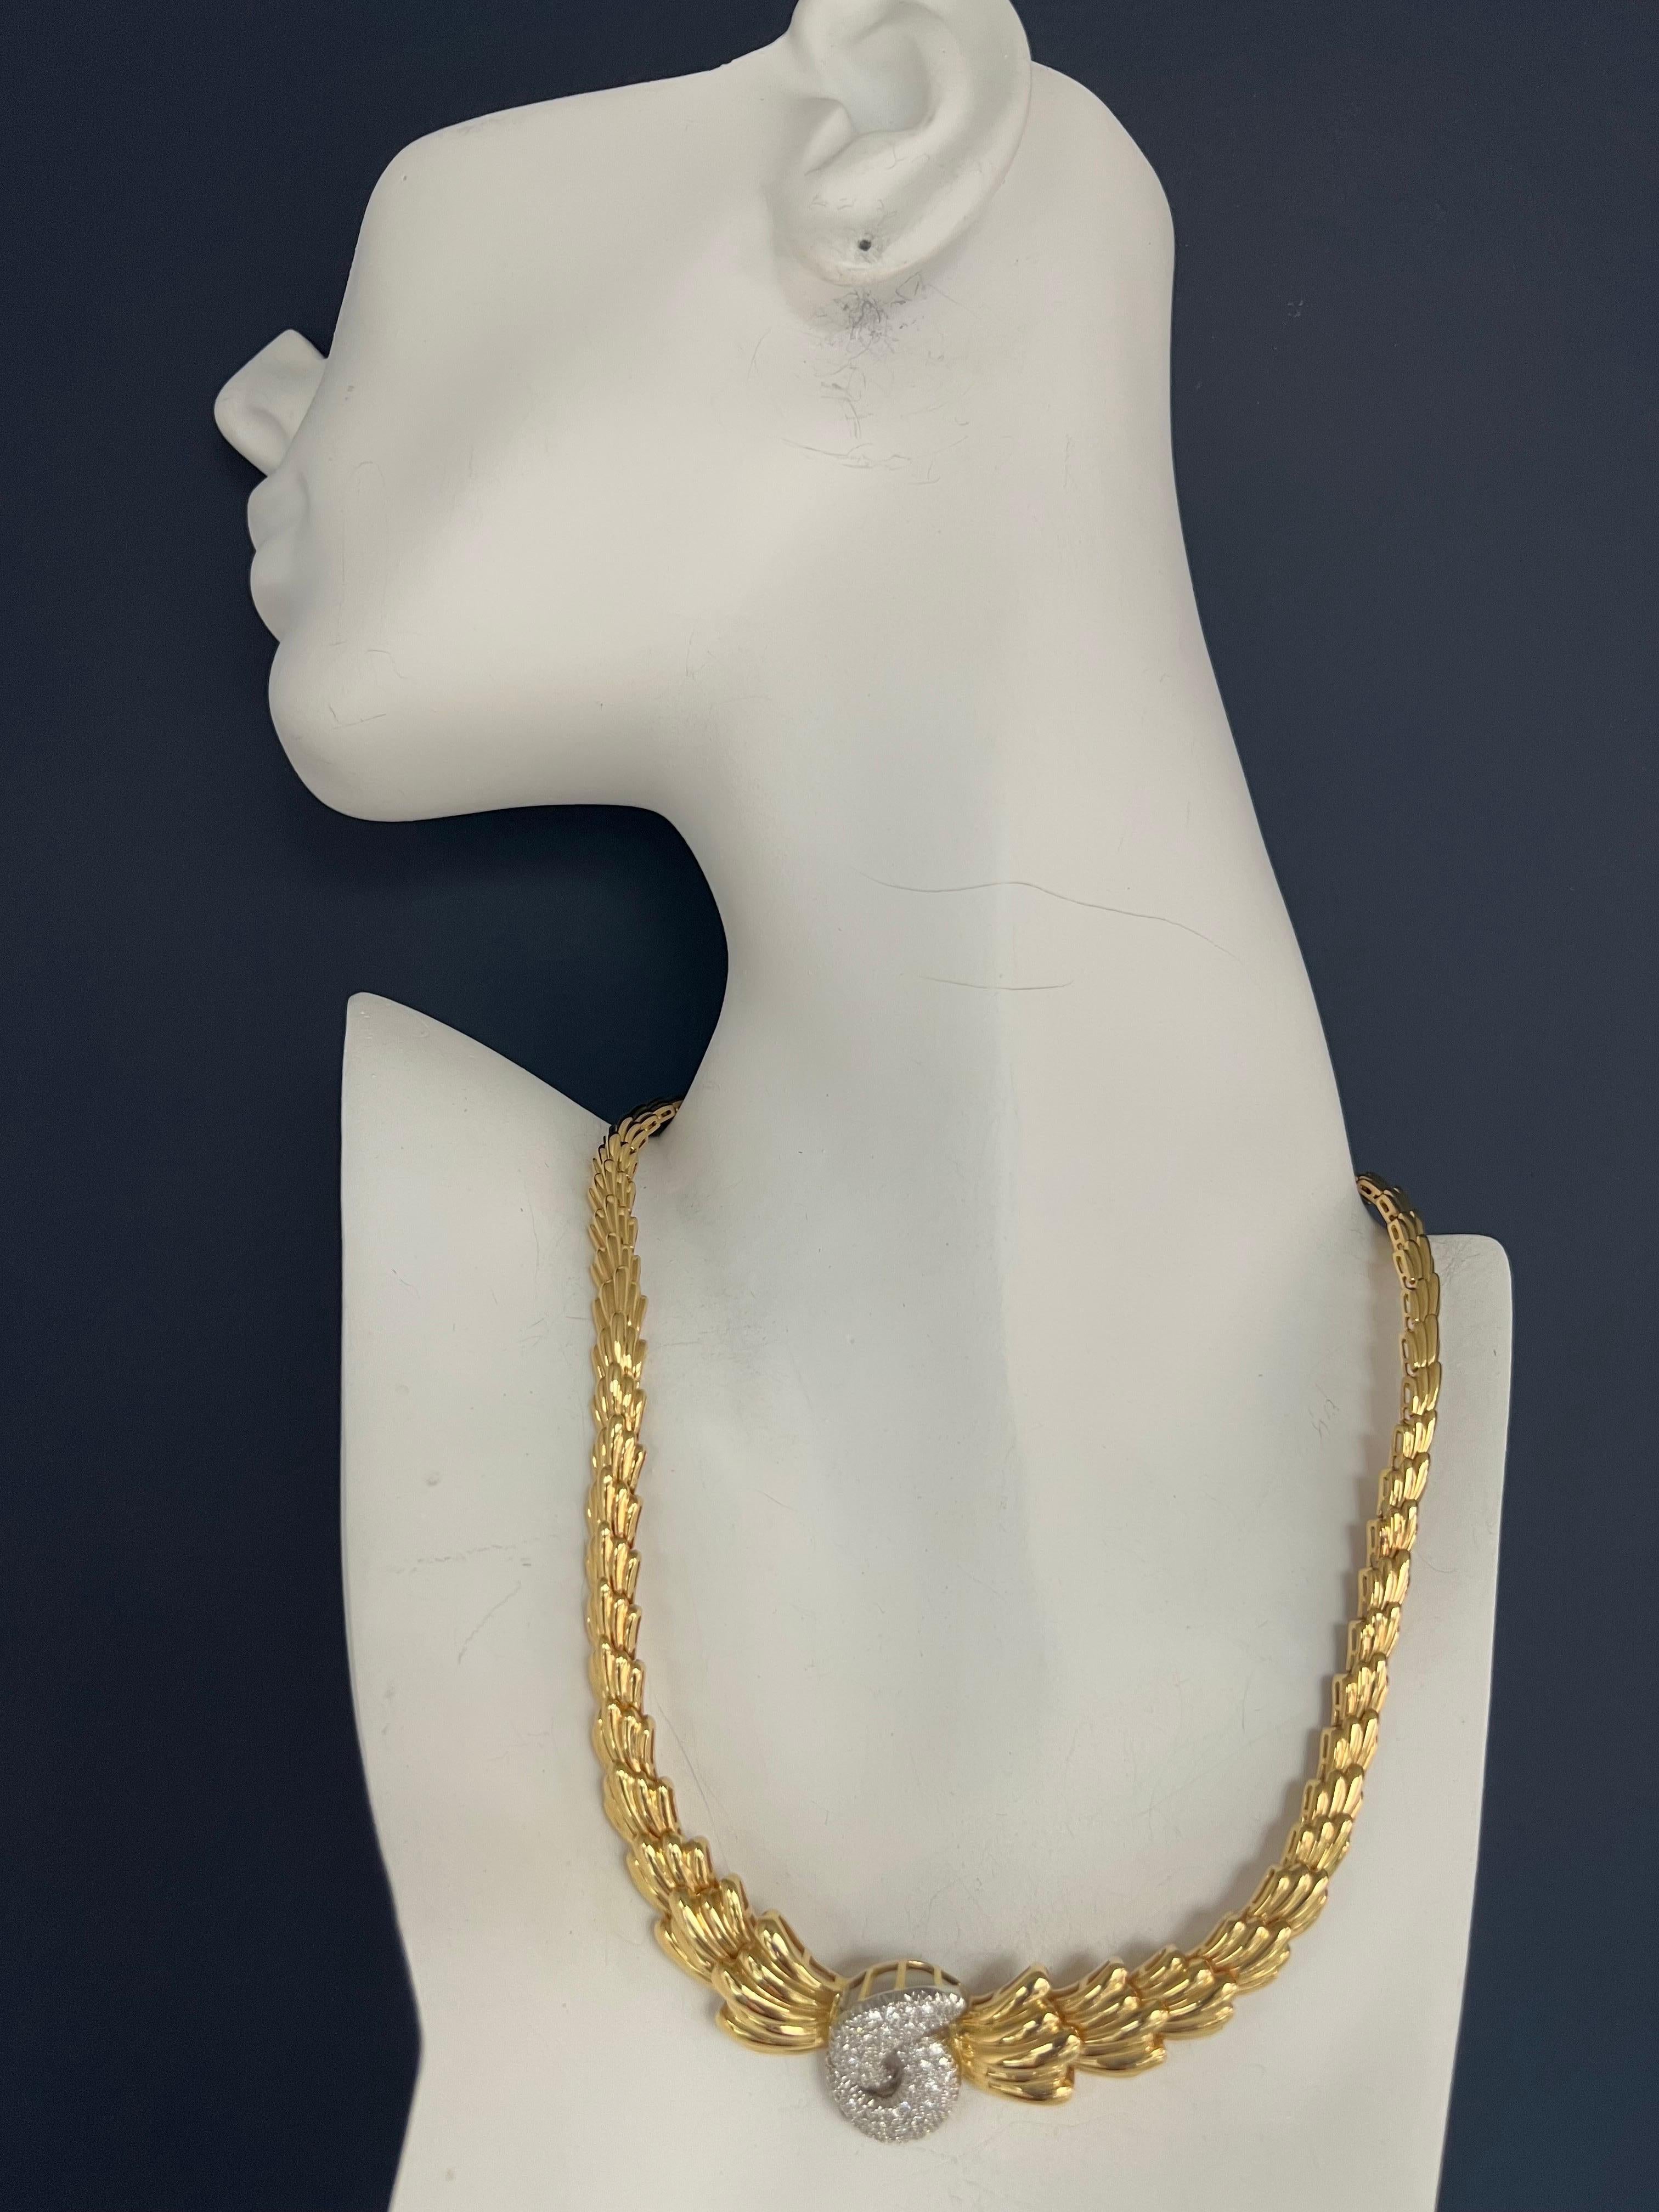 A magnificent 18k yellow gold diamond necklace. 

The piece is set with approximately 70 natural colorless round brilliant diamonds weighing 1.05 carats. 

It weighs 62 grams in total and measures 17 inches in length. 